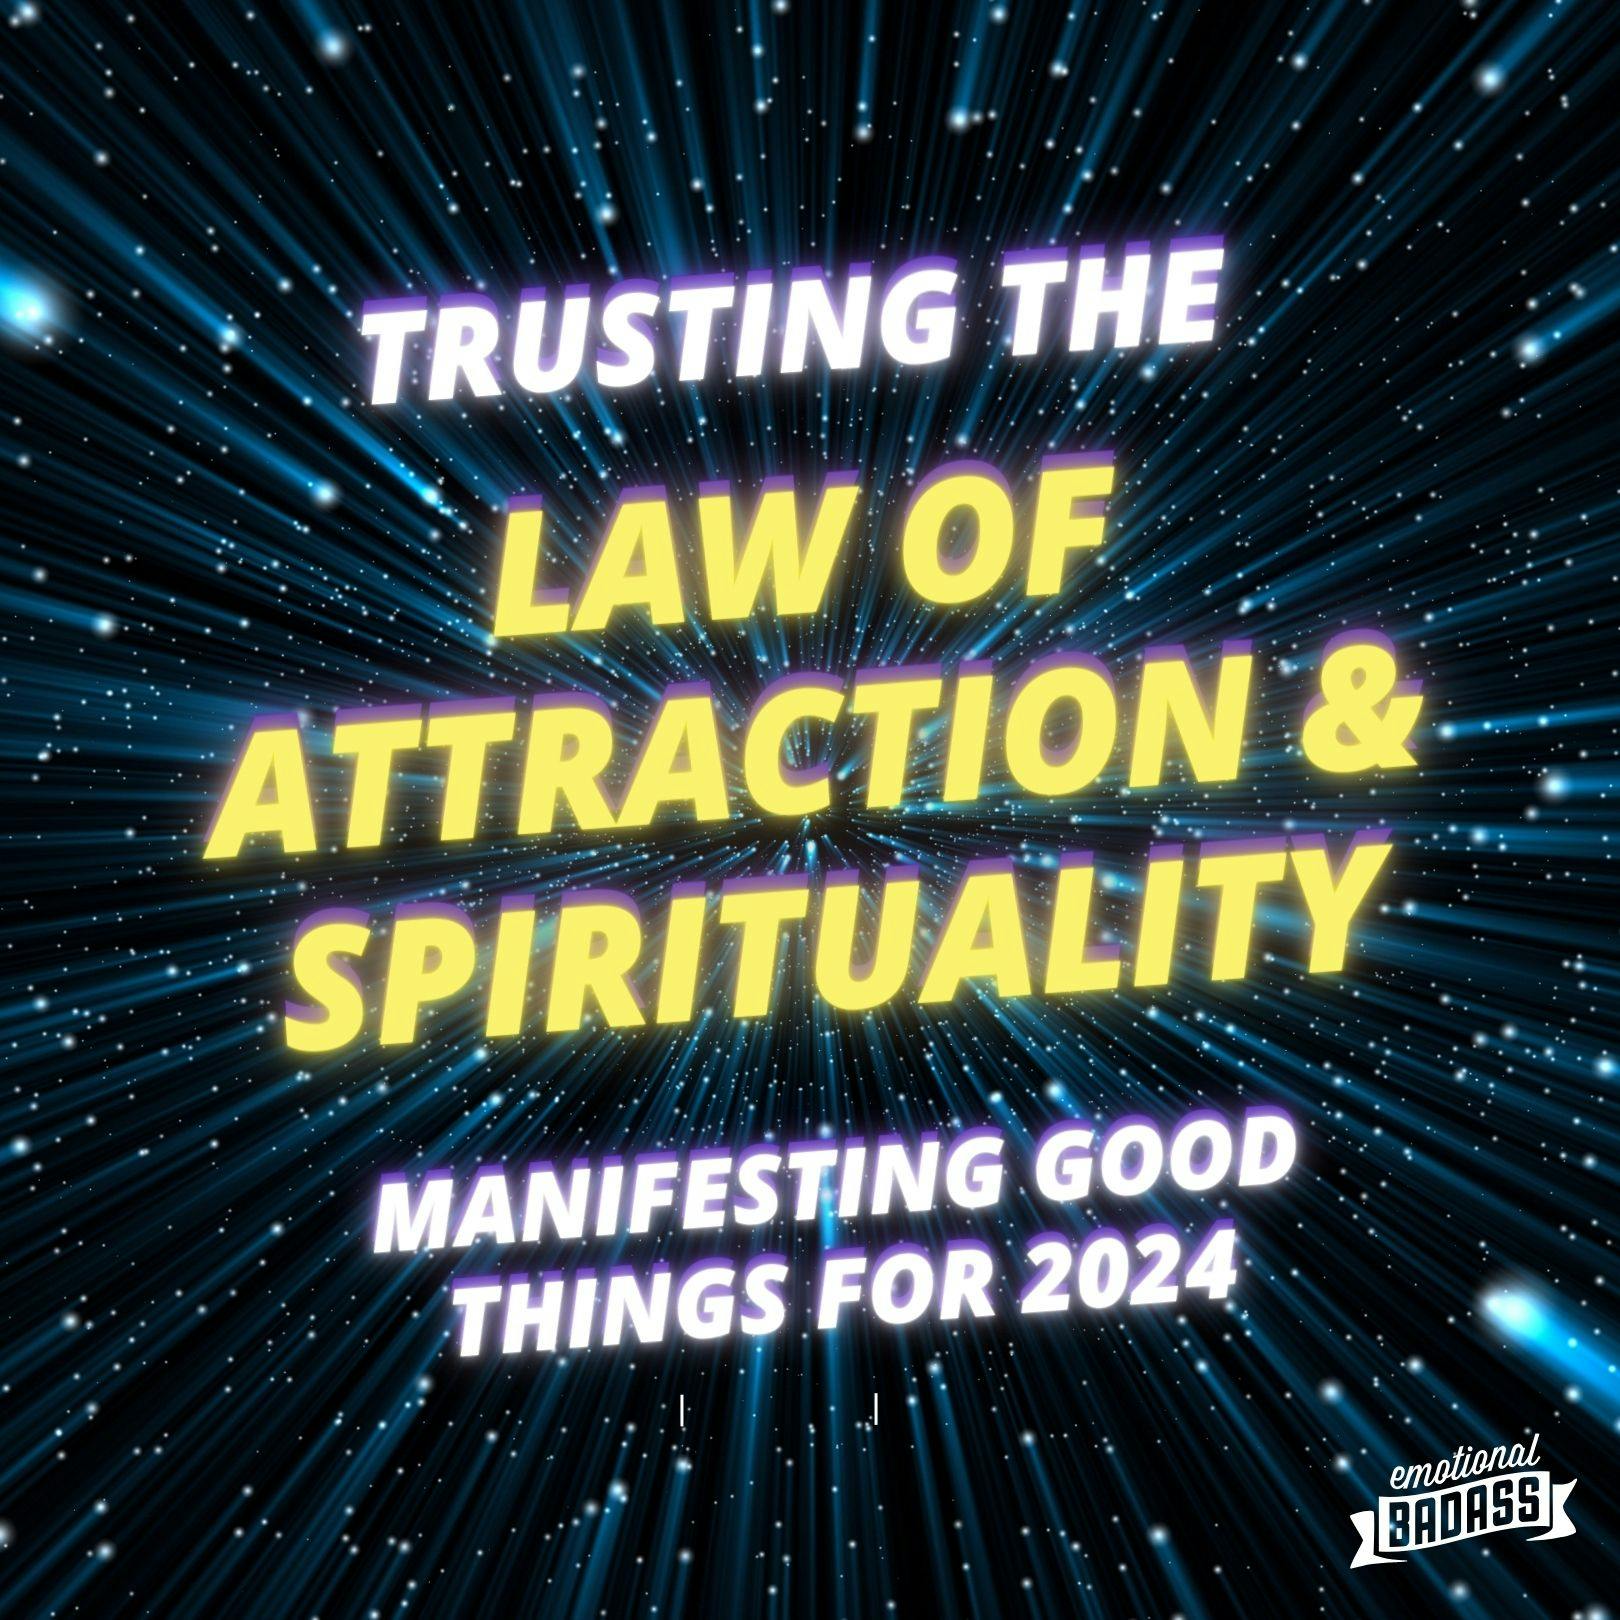 Trusting the Law of Attraction, Spirituality, & Good Things for 2024